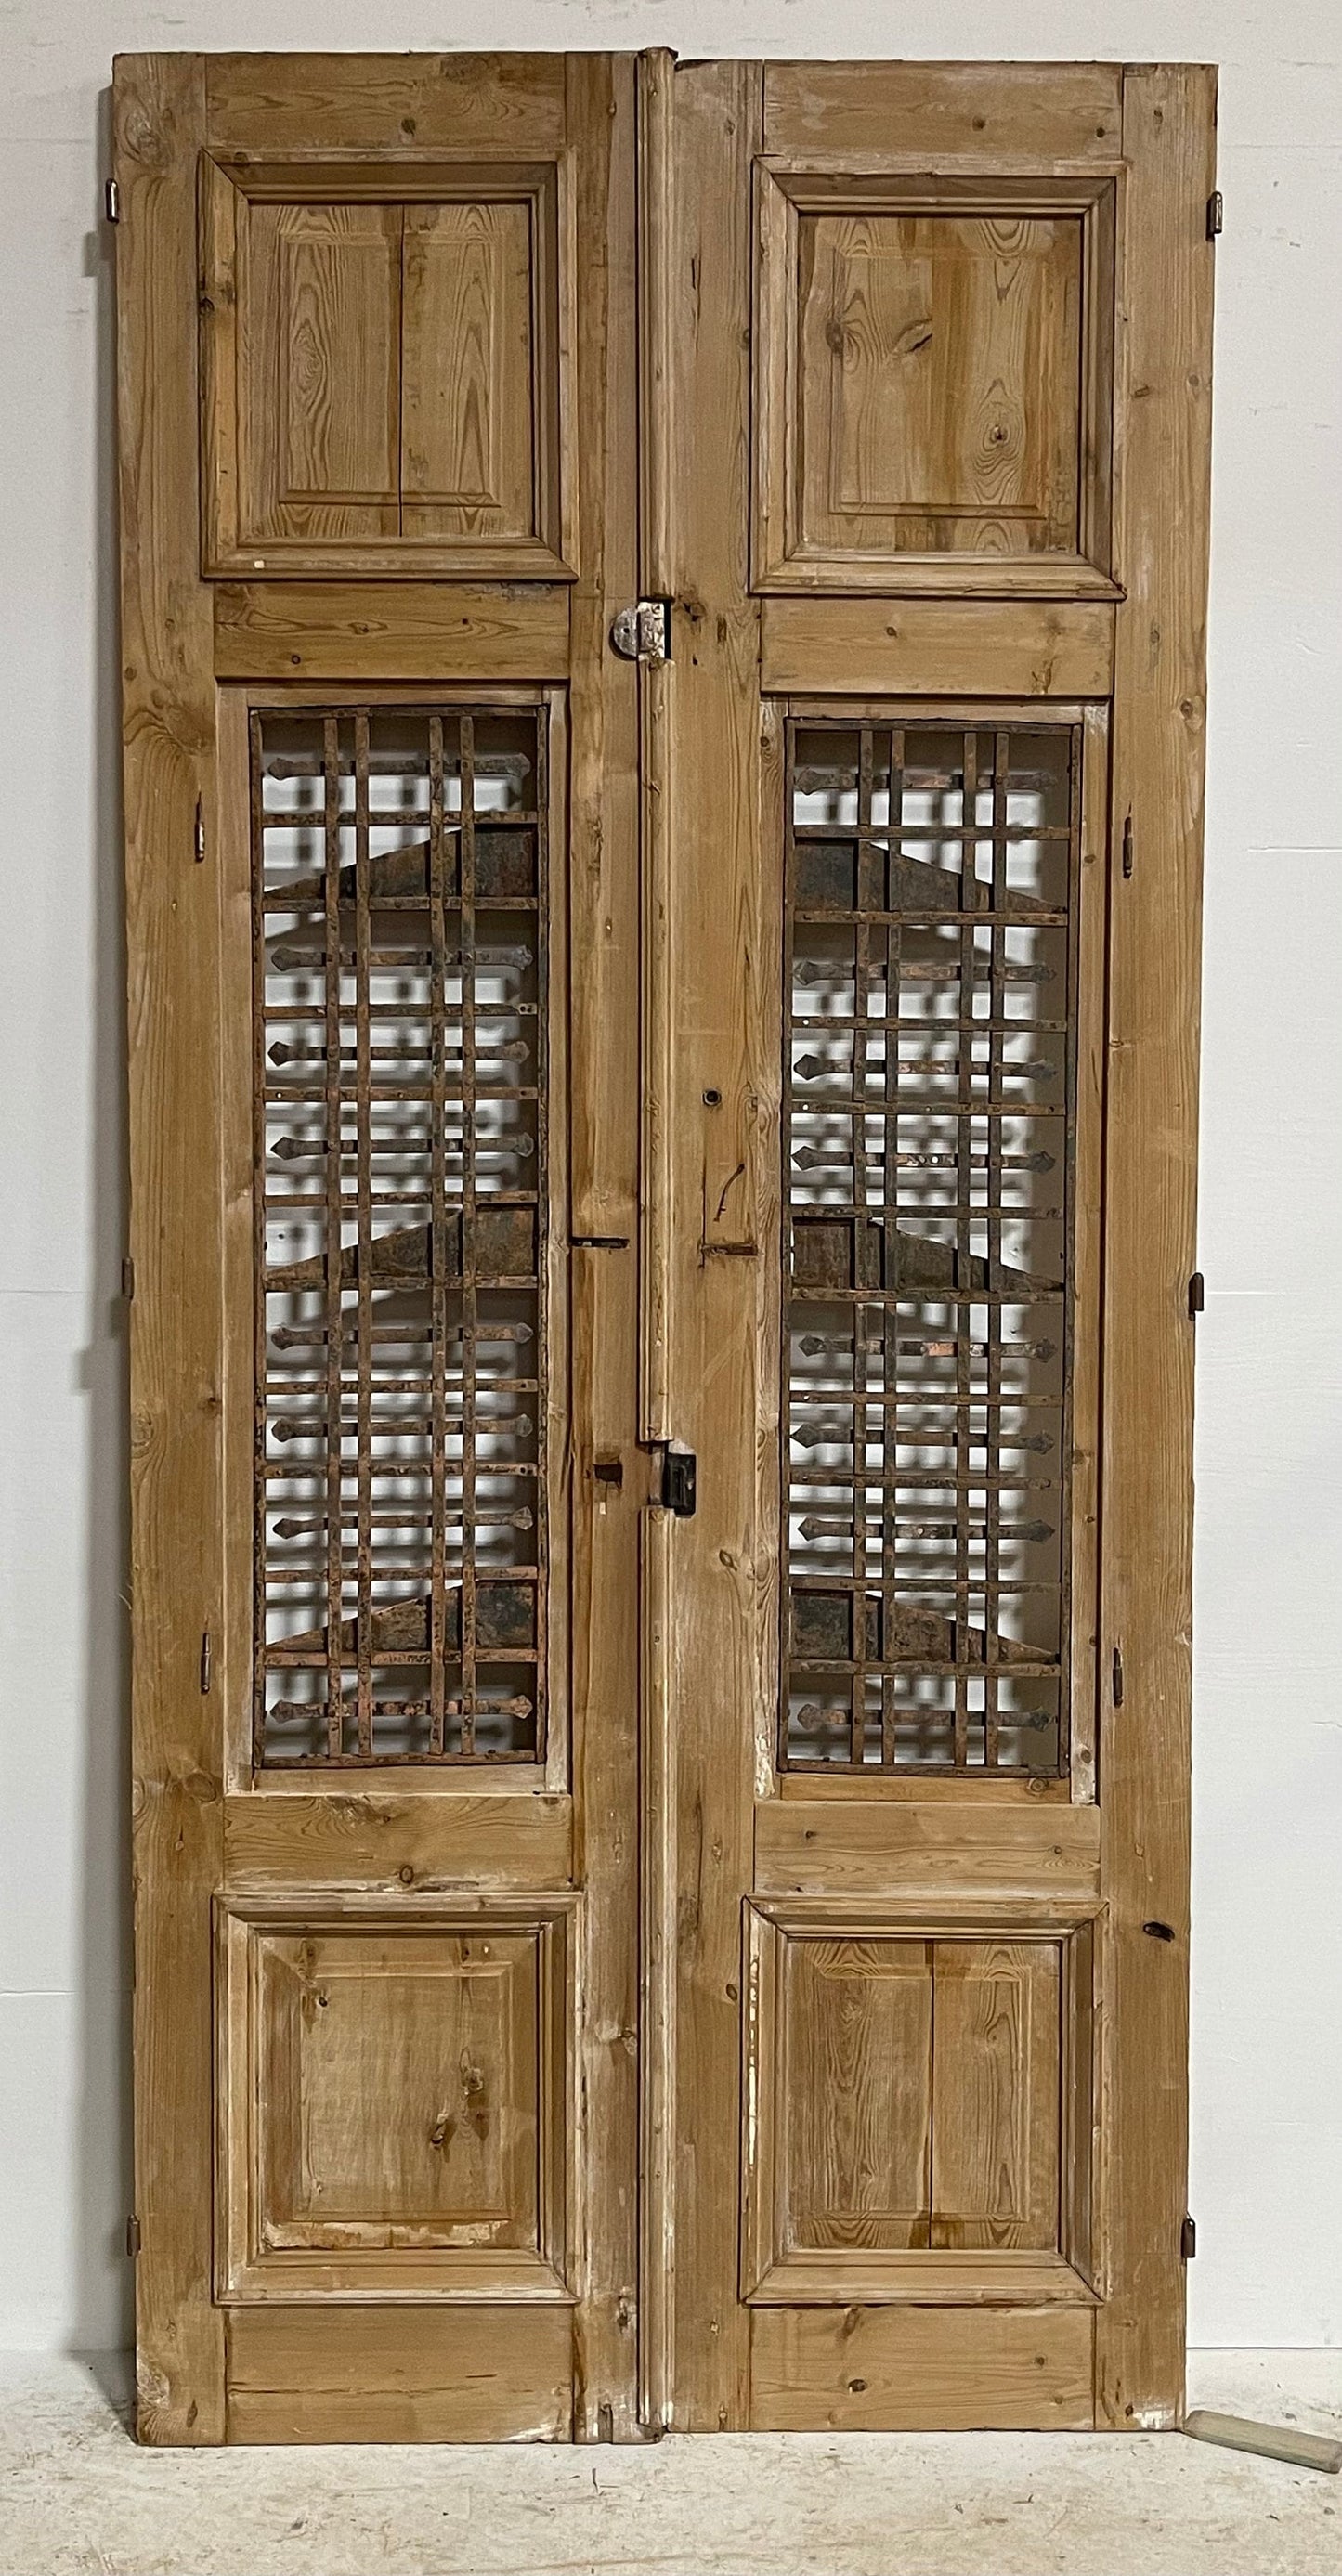 Antique French panel doors with metal (99x44.5) H0014s